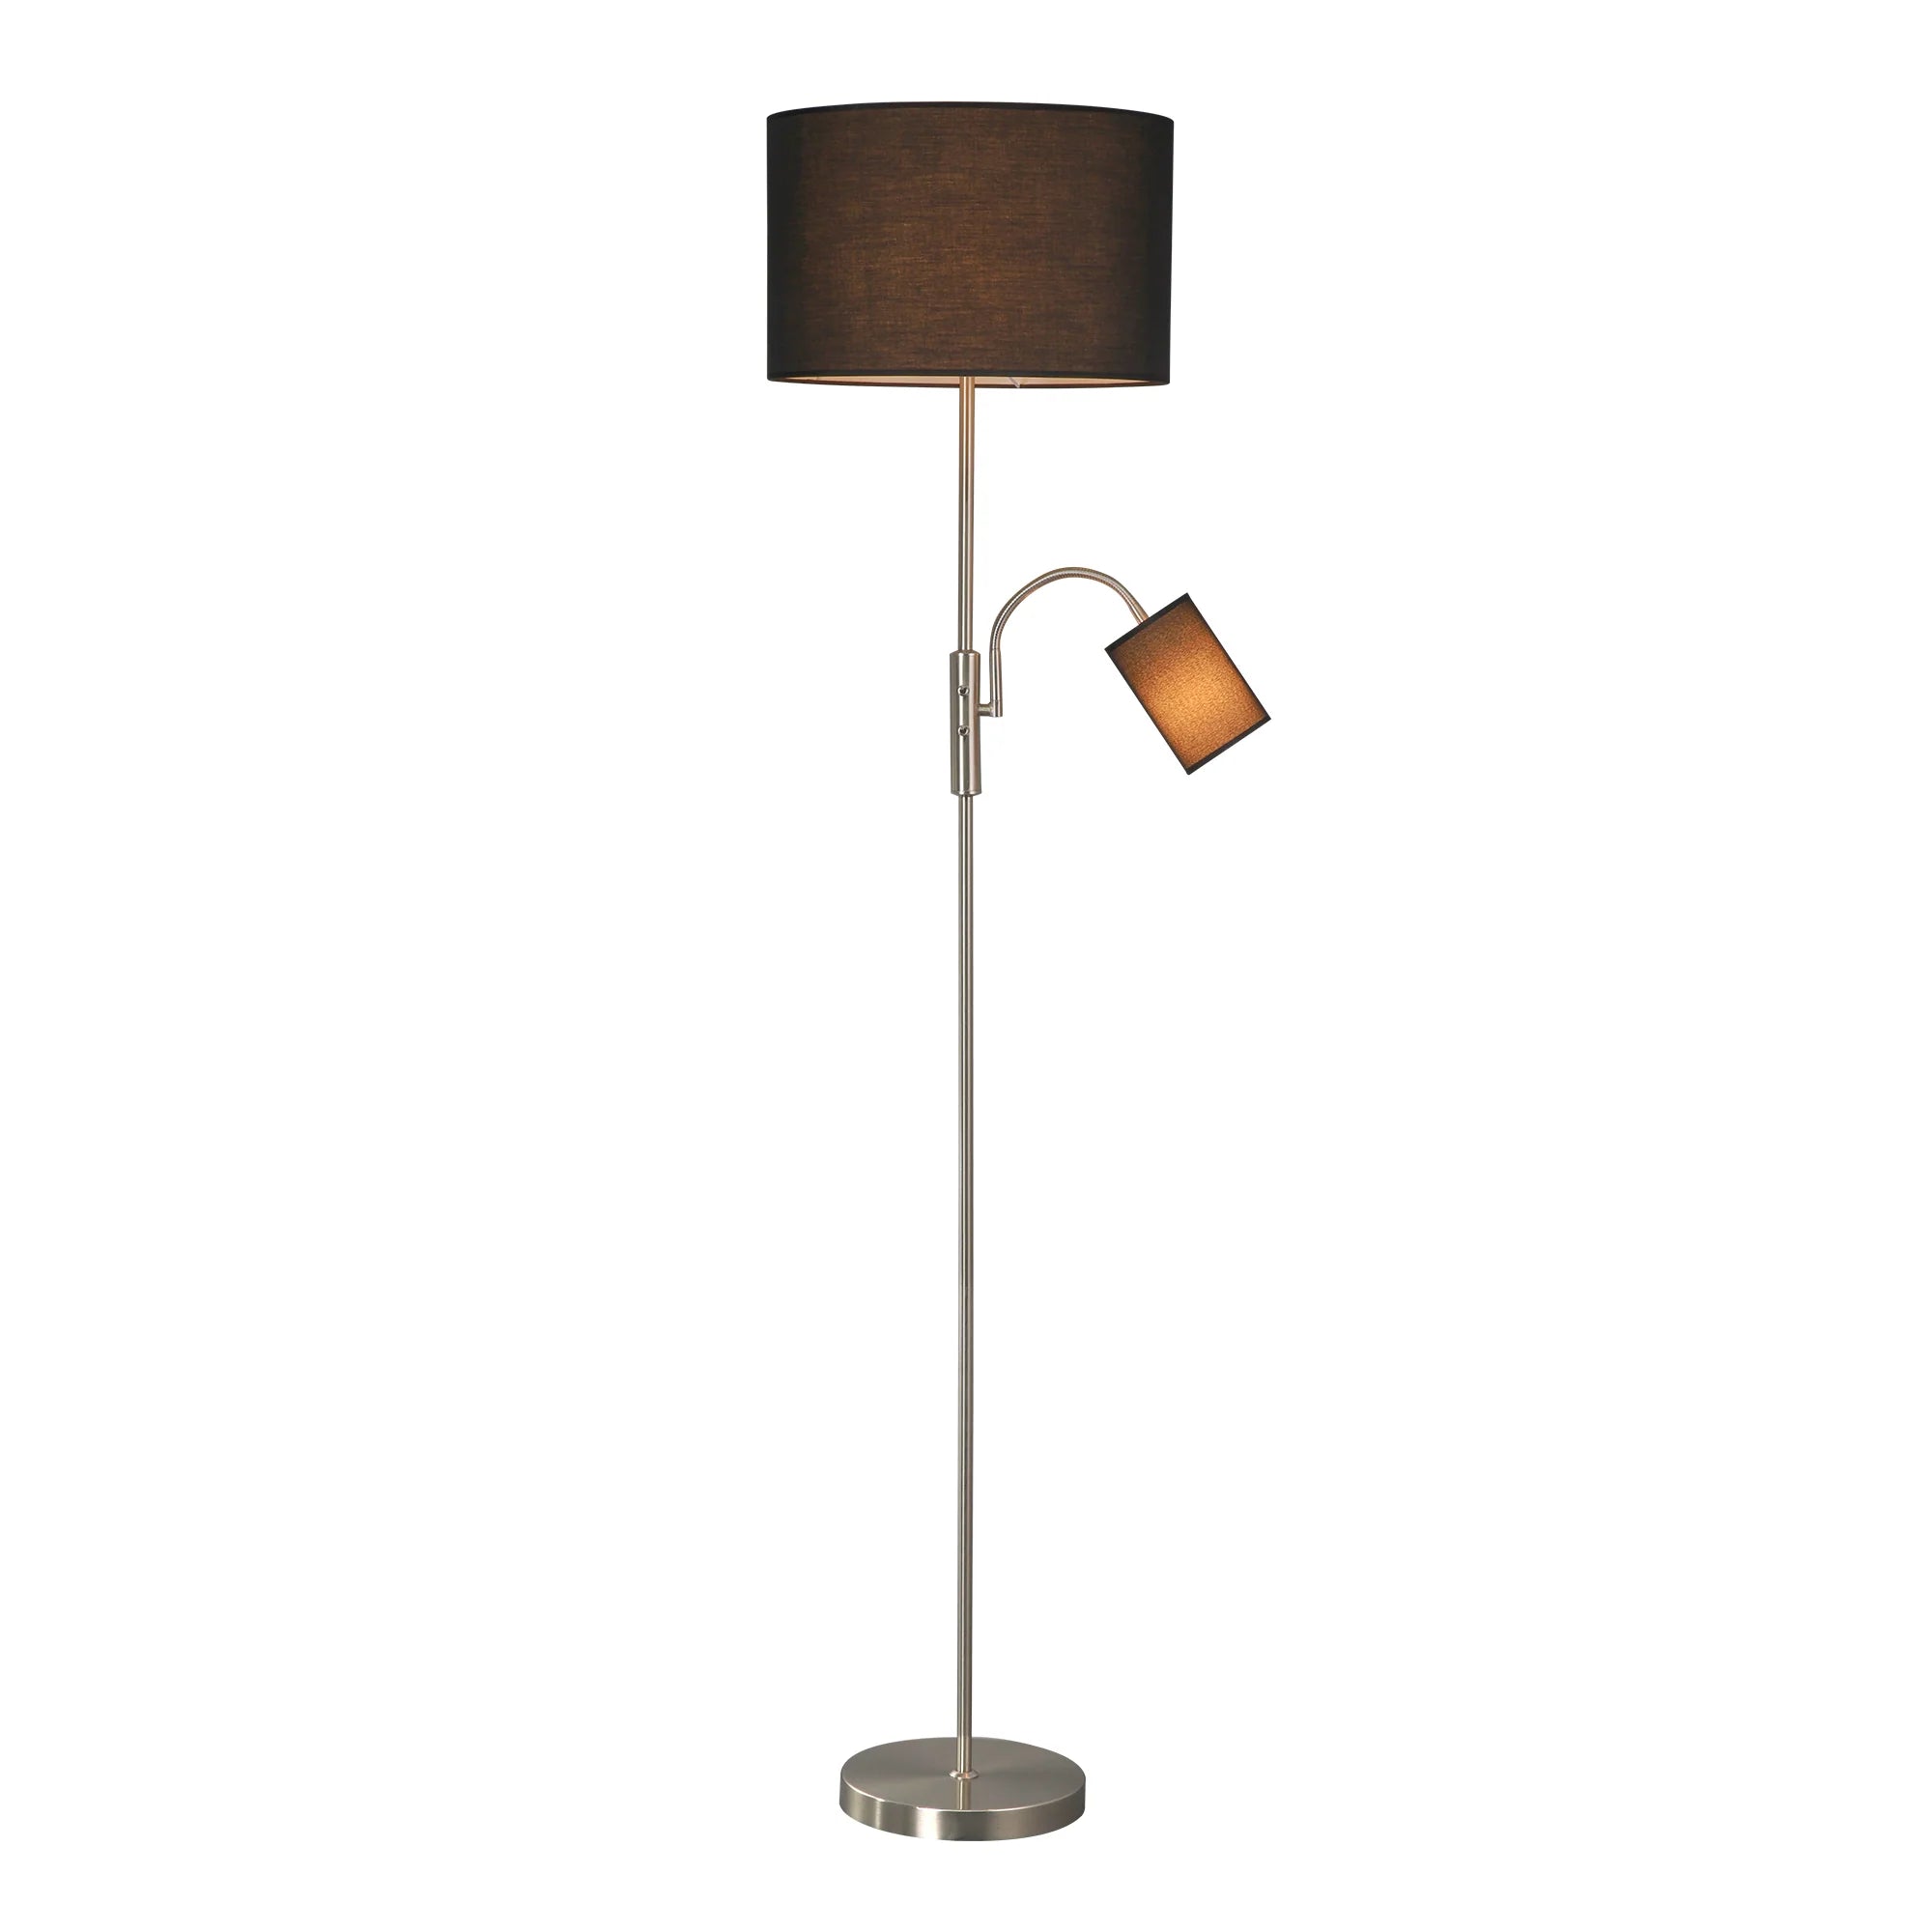 Lexi Cylinya Mother and Child Floor Lamp